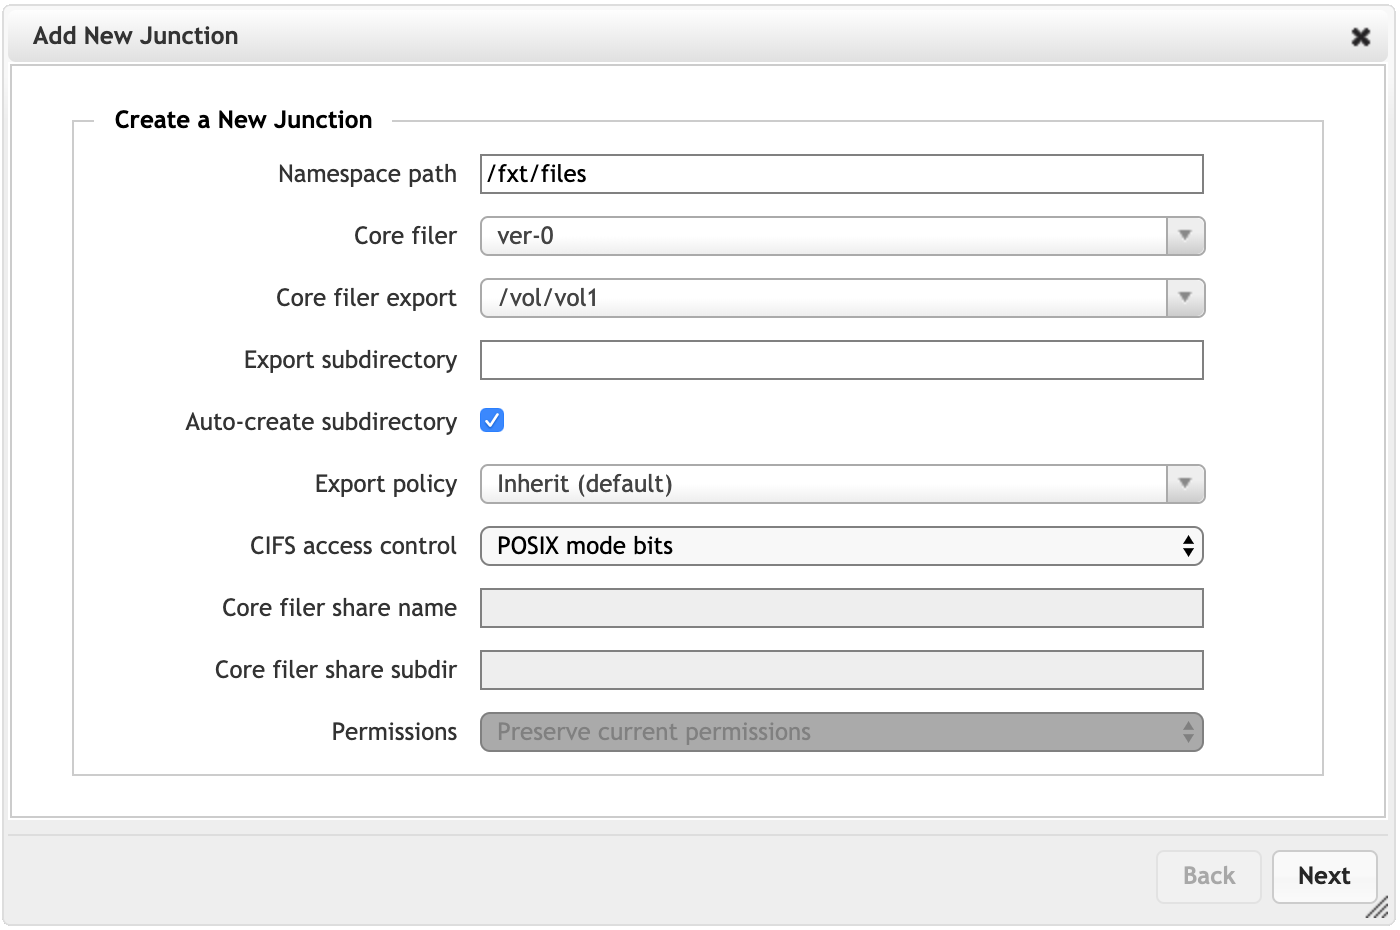 "Add new junction" dialog with /avere/files in the namespace path field